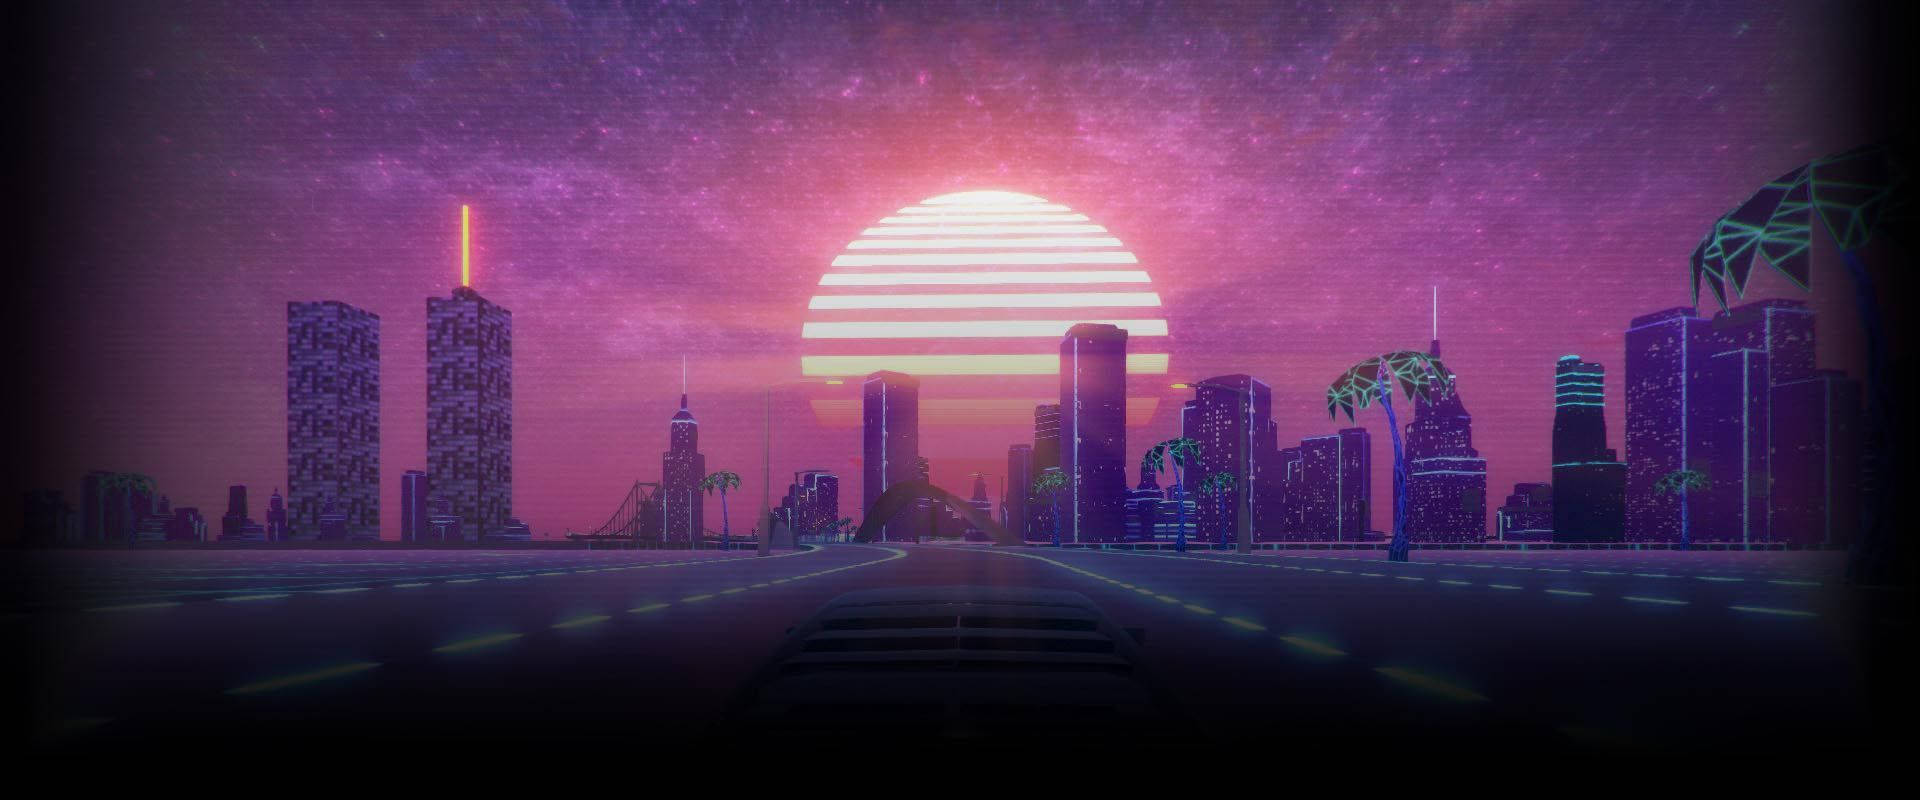 Sunset And The City Vaporwave Background